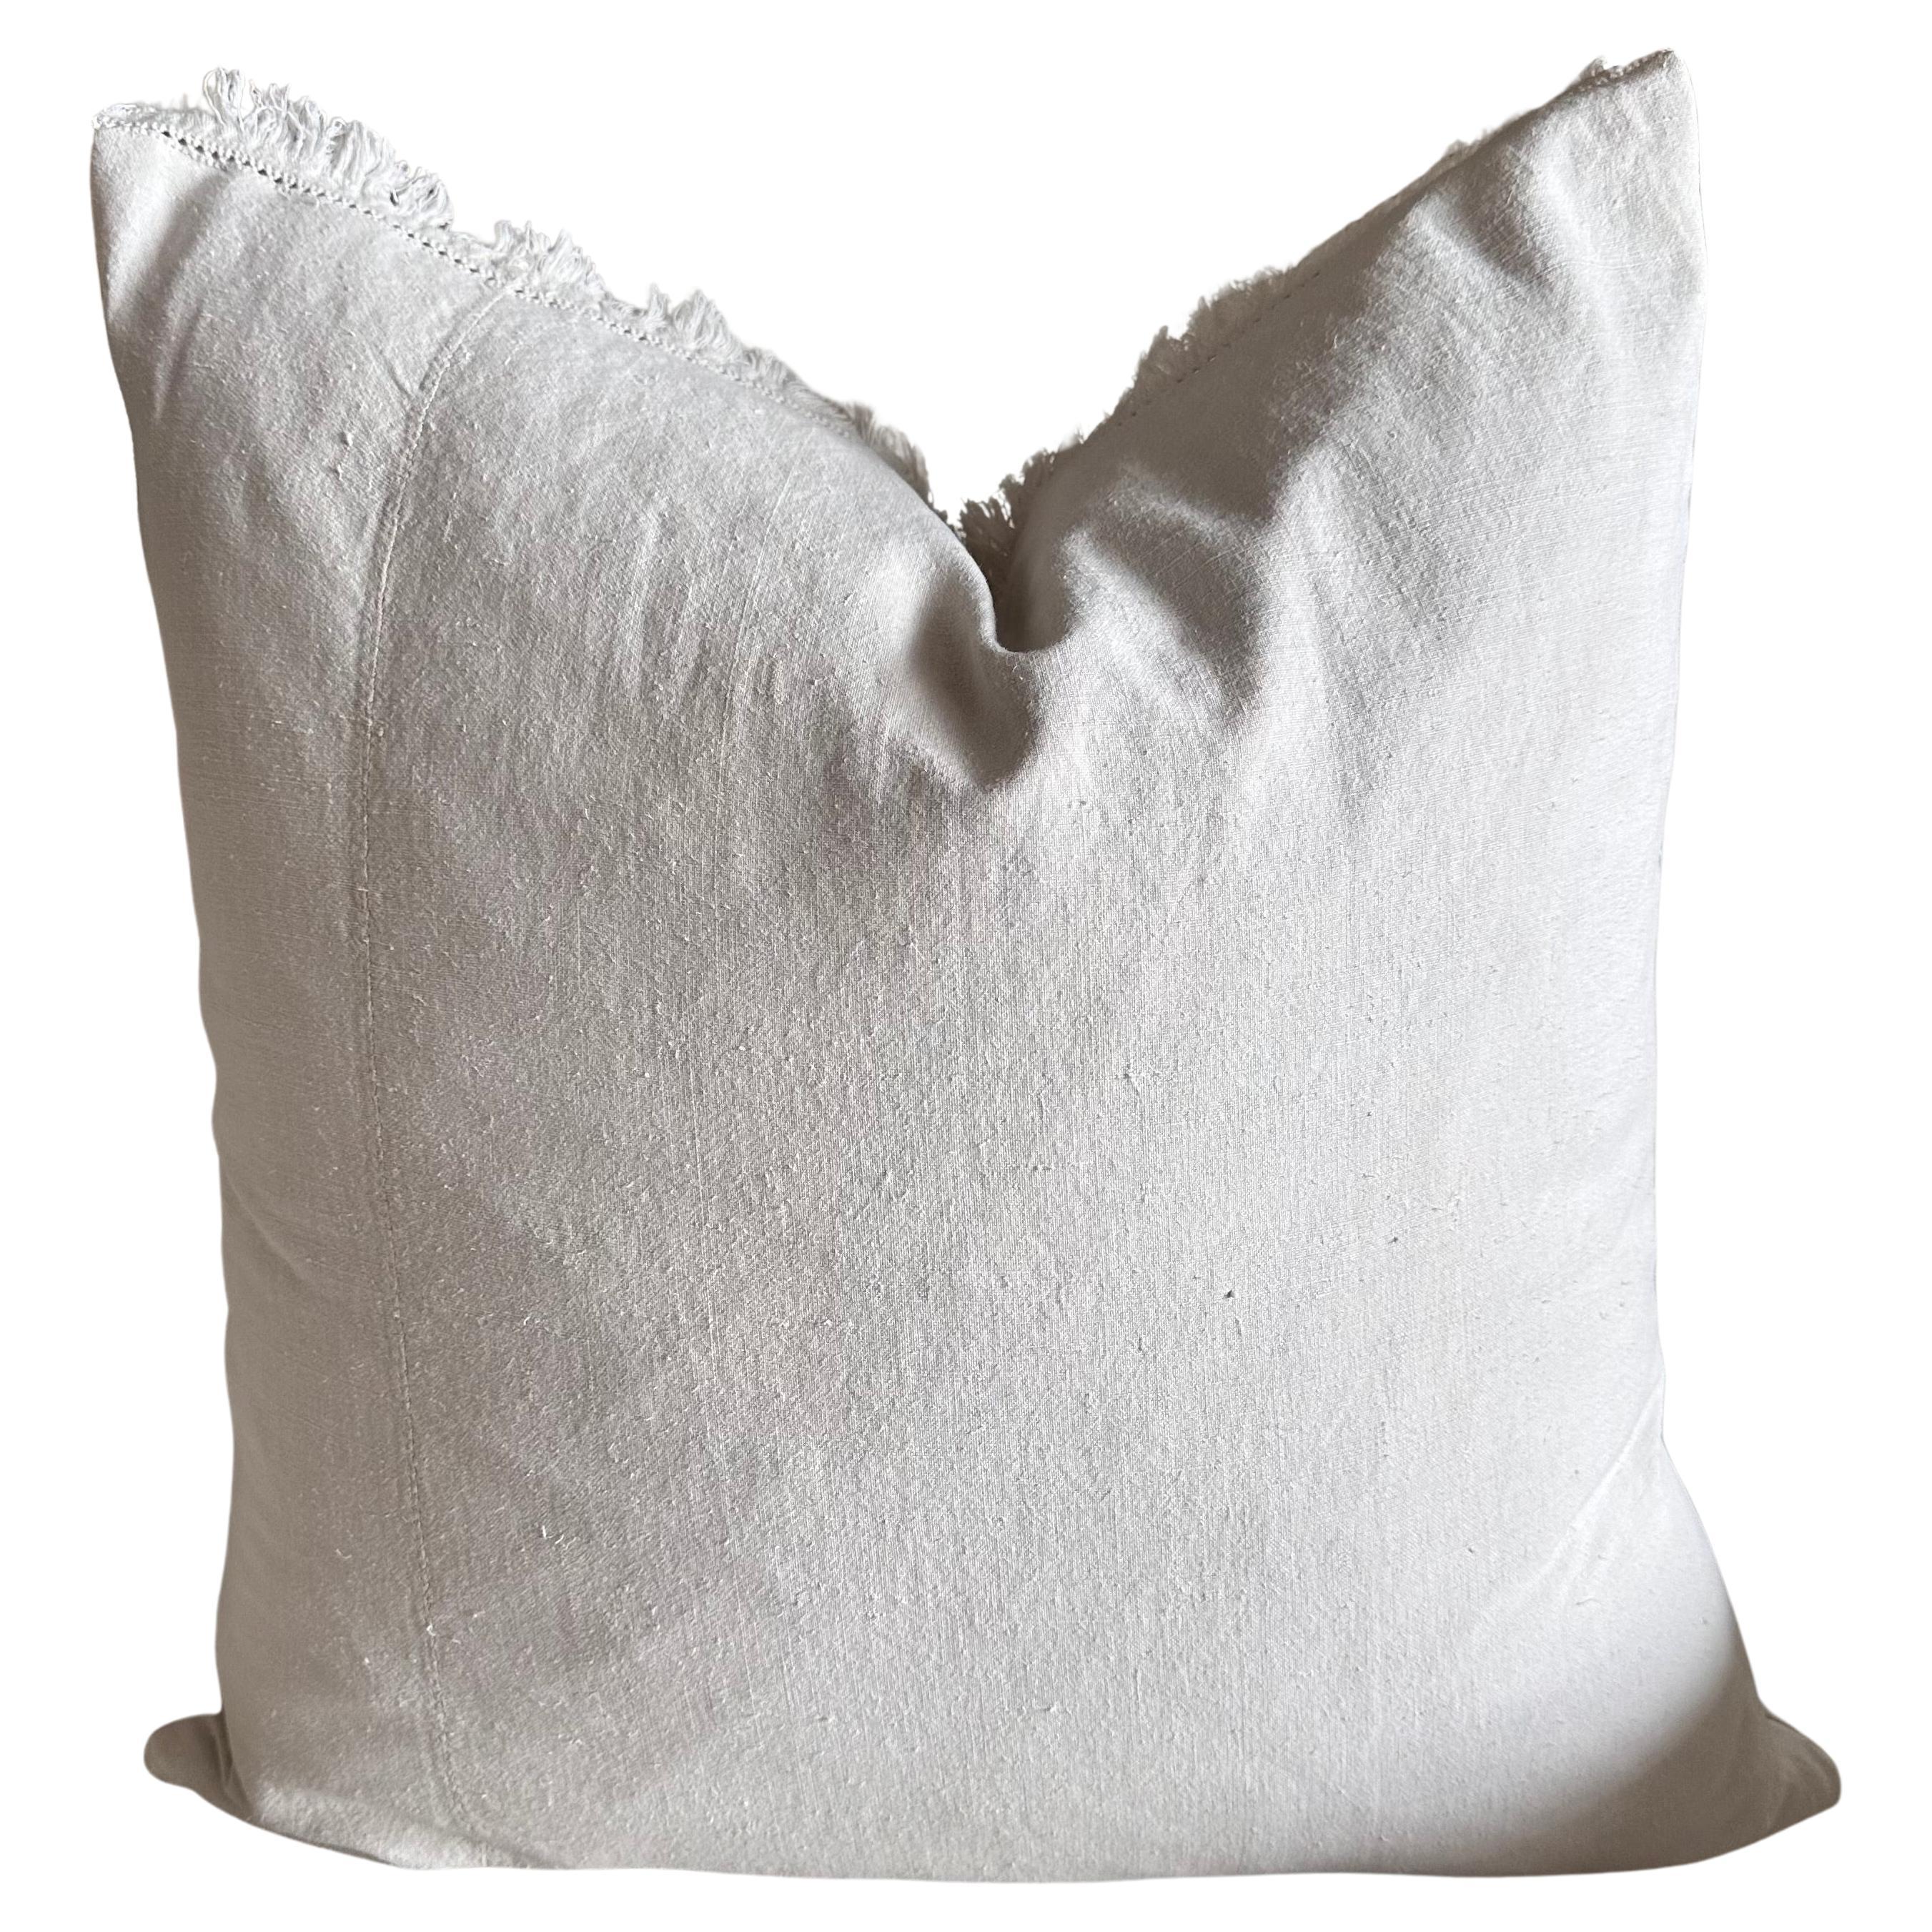 Antique French White Grain Linen Pillows with Insert For Sale